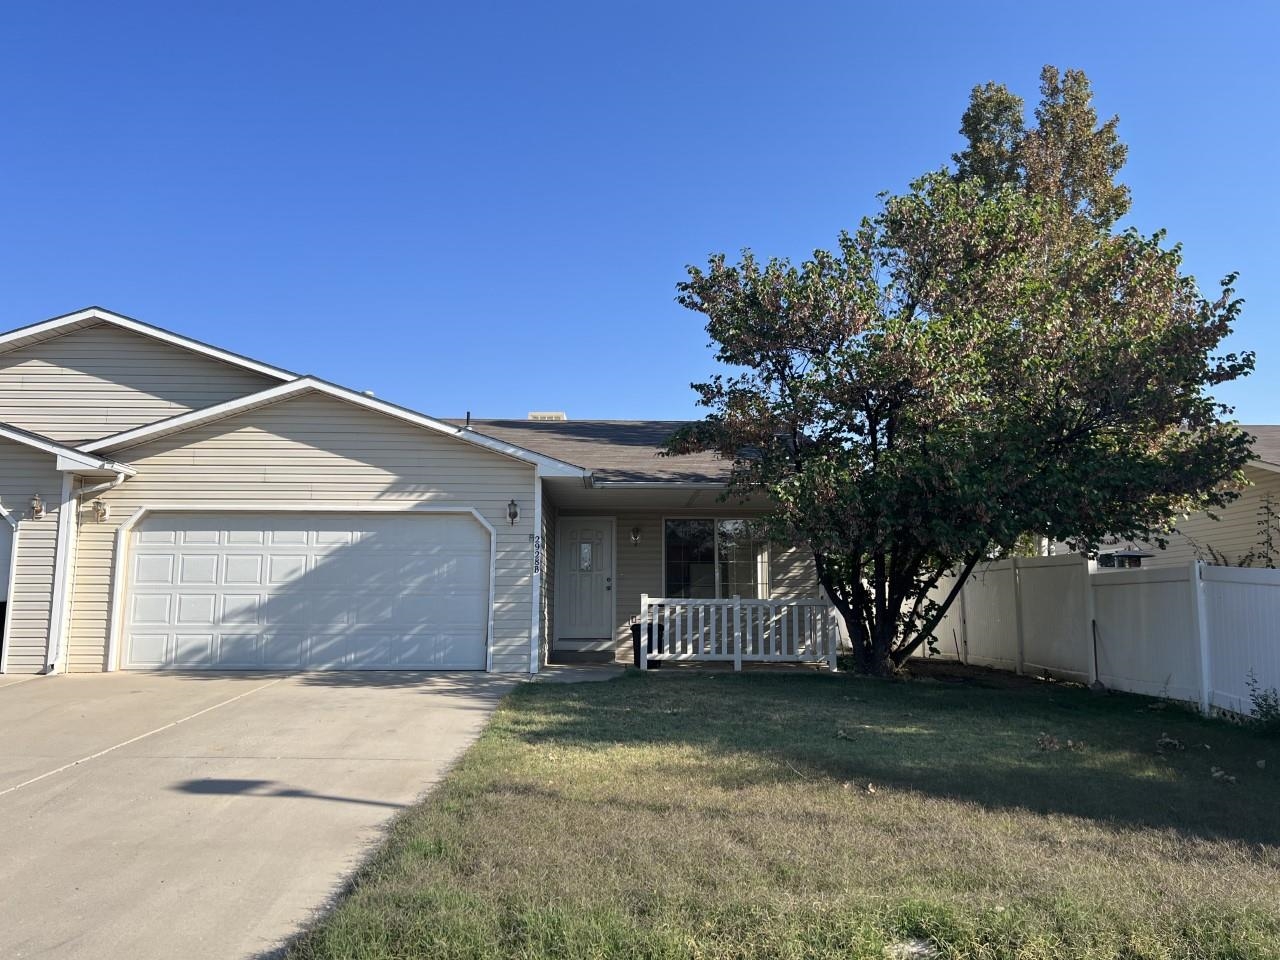 Centrally located condo with functional floor plan with 3 beds, 2 bath and 2 car attached garage. Natural light floods in throughout all day giving a warm and inviting feeling. Seller offering allowance for new paint and carpet.